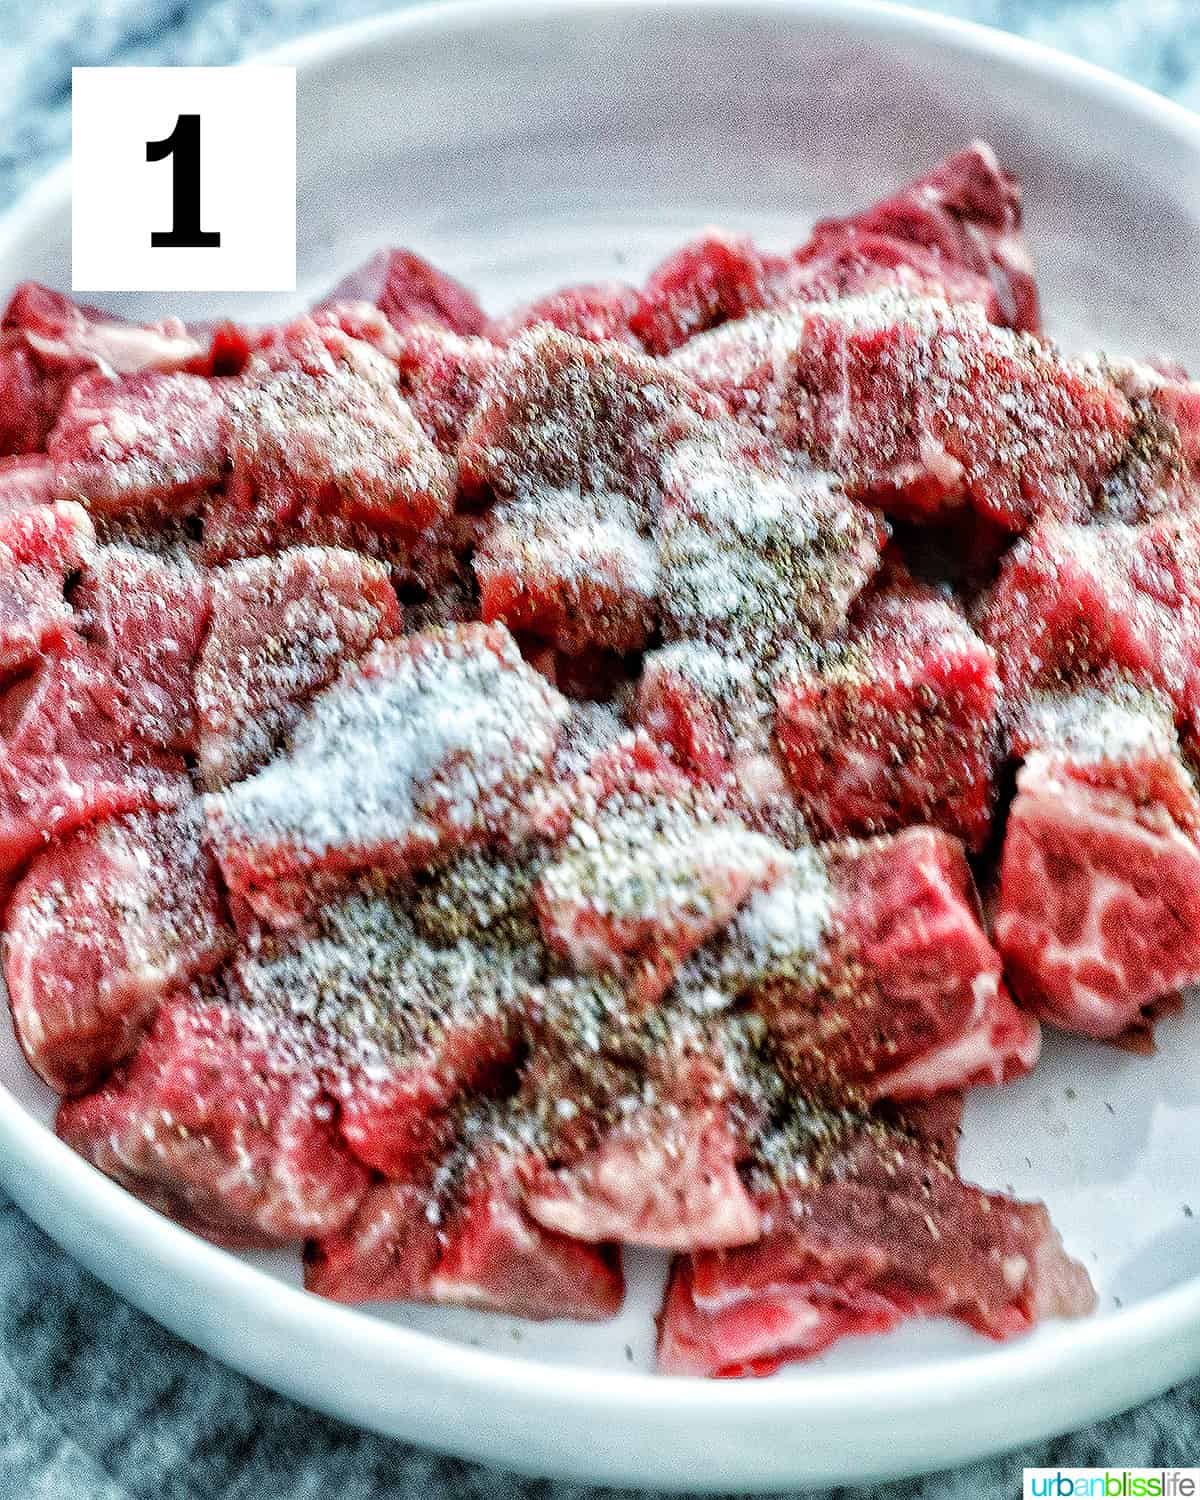 seasoned beef chunks with salt and pepper in a large white platter.